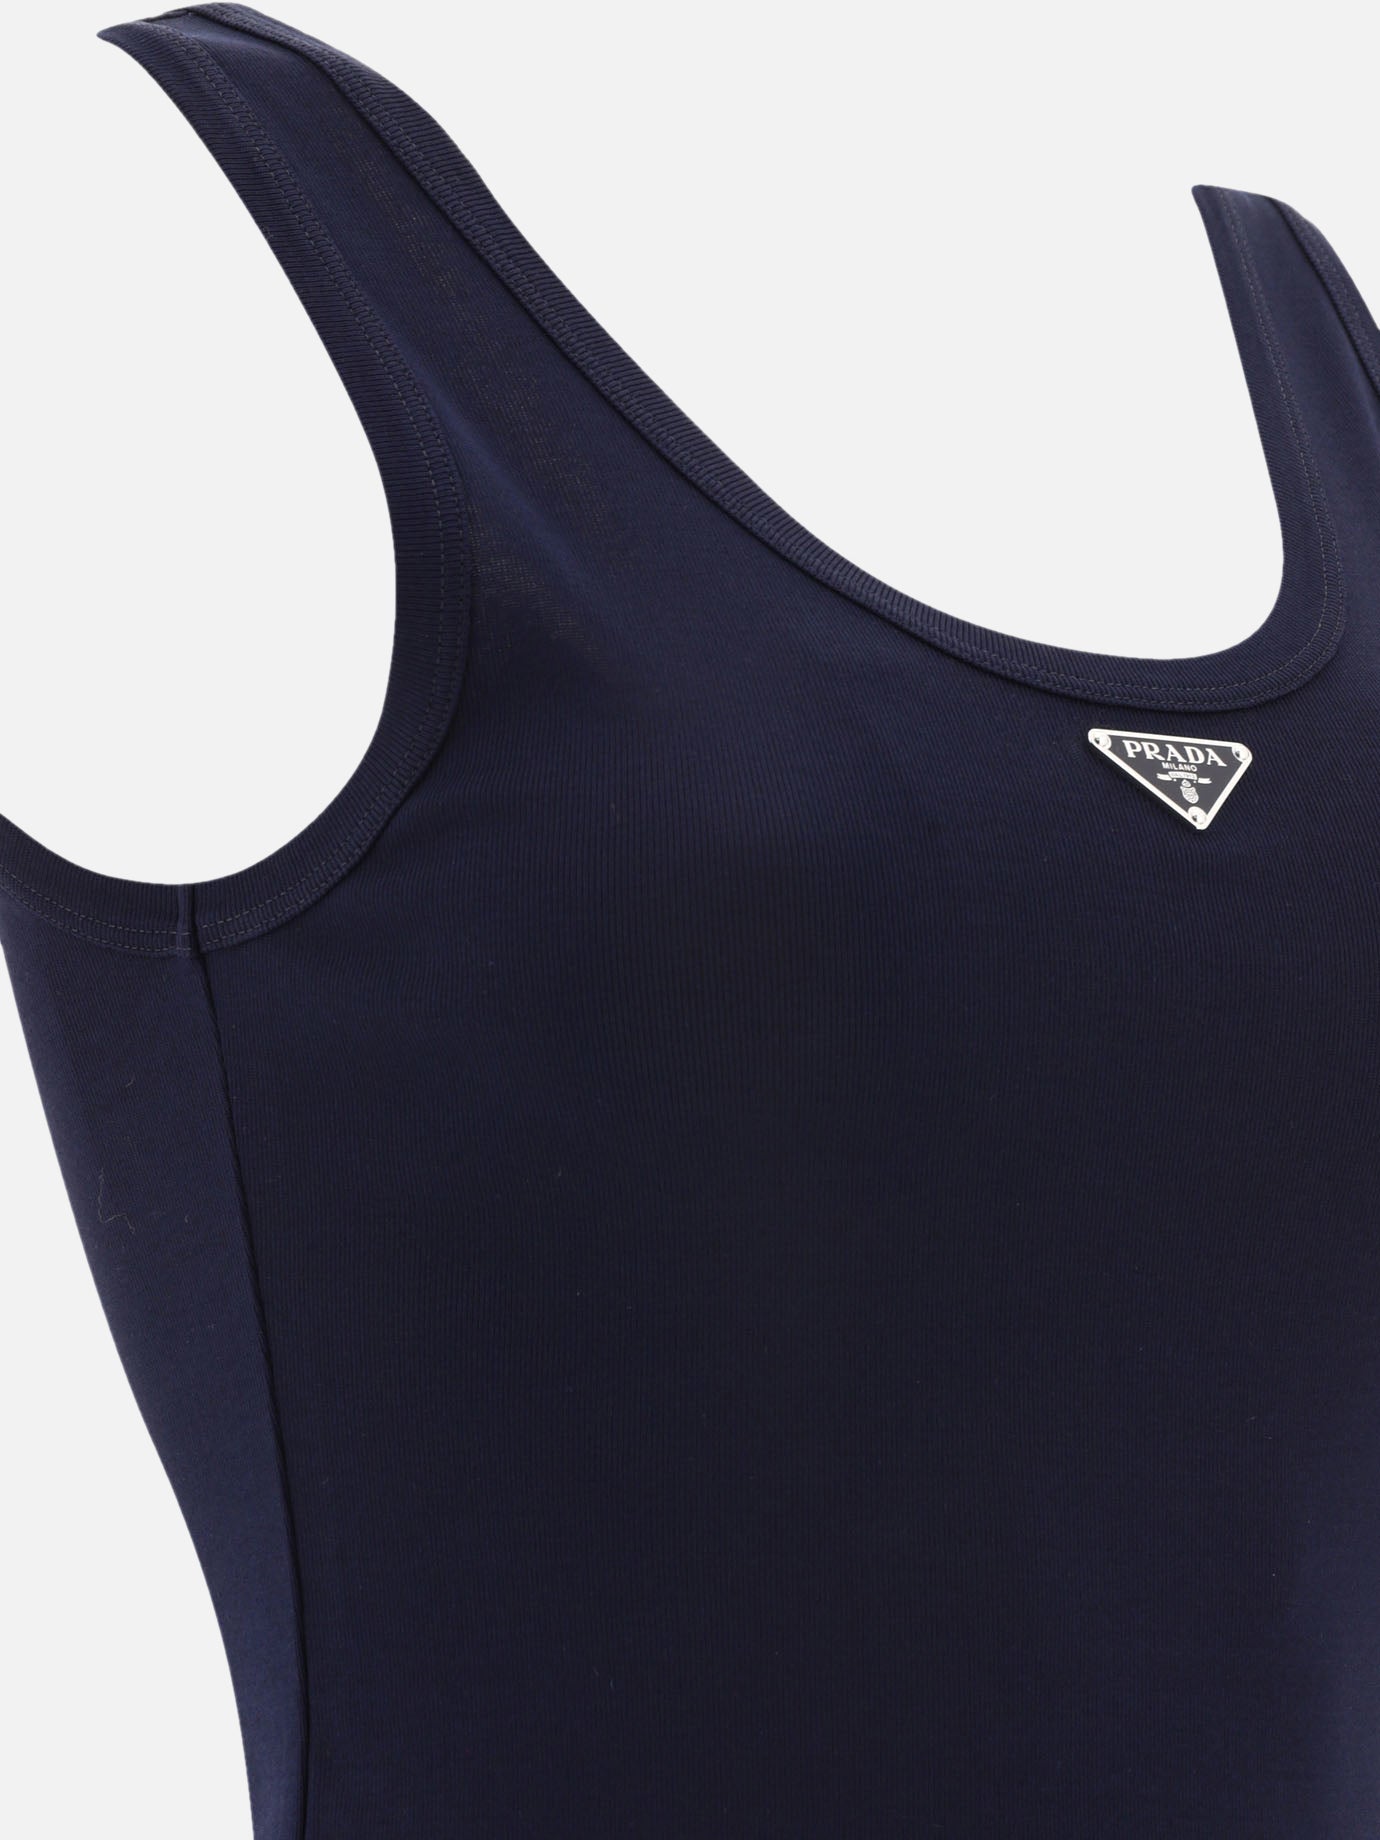 Tank top with triangle logo